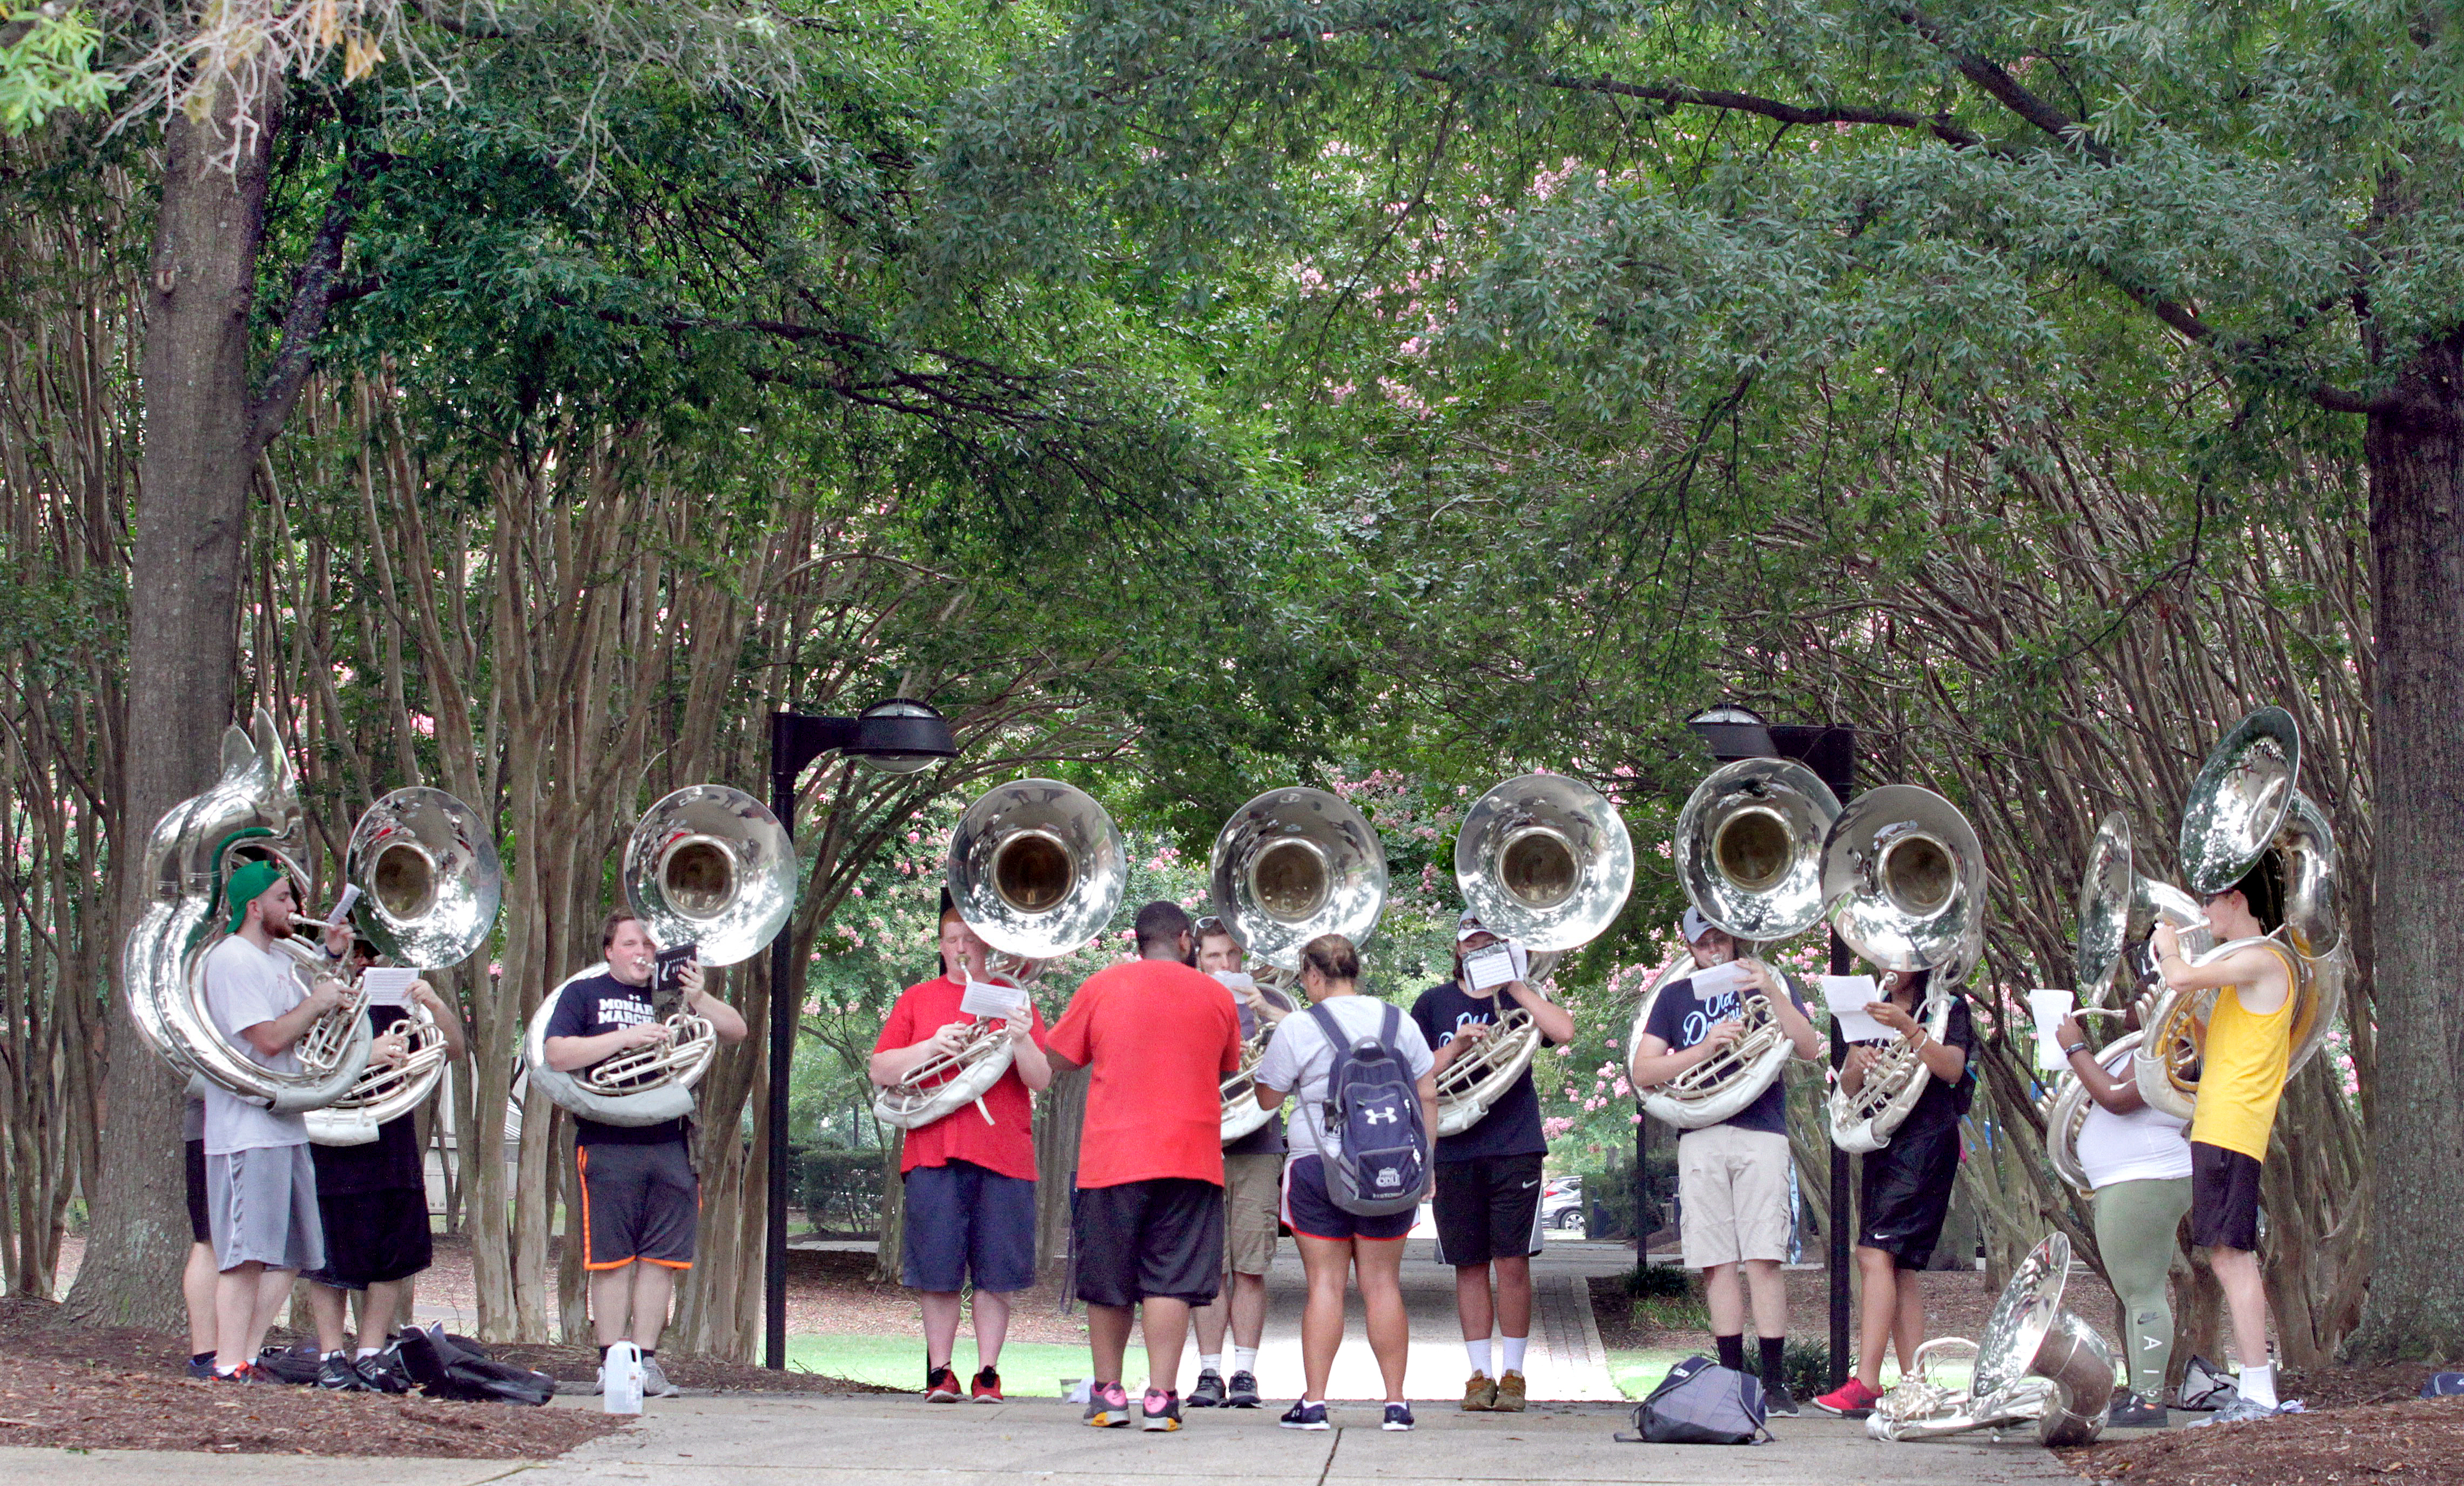 Tubas in the Trees